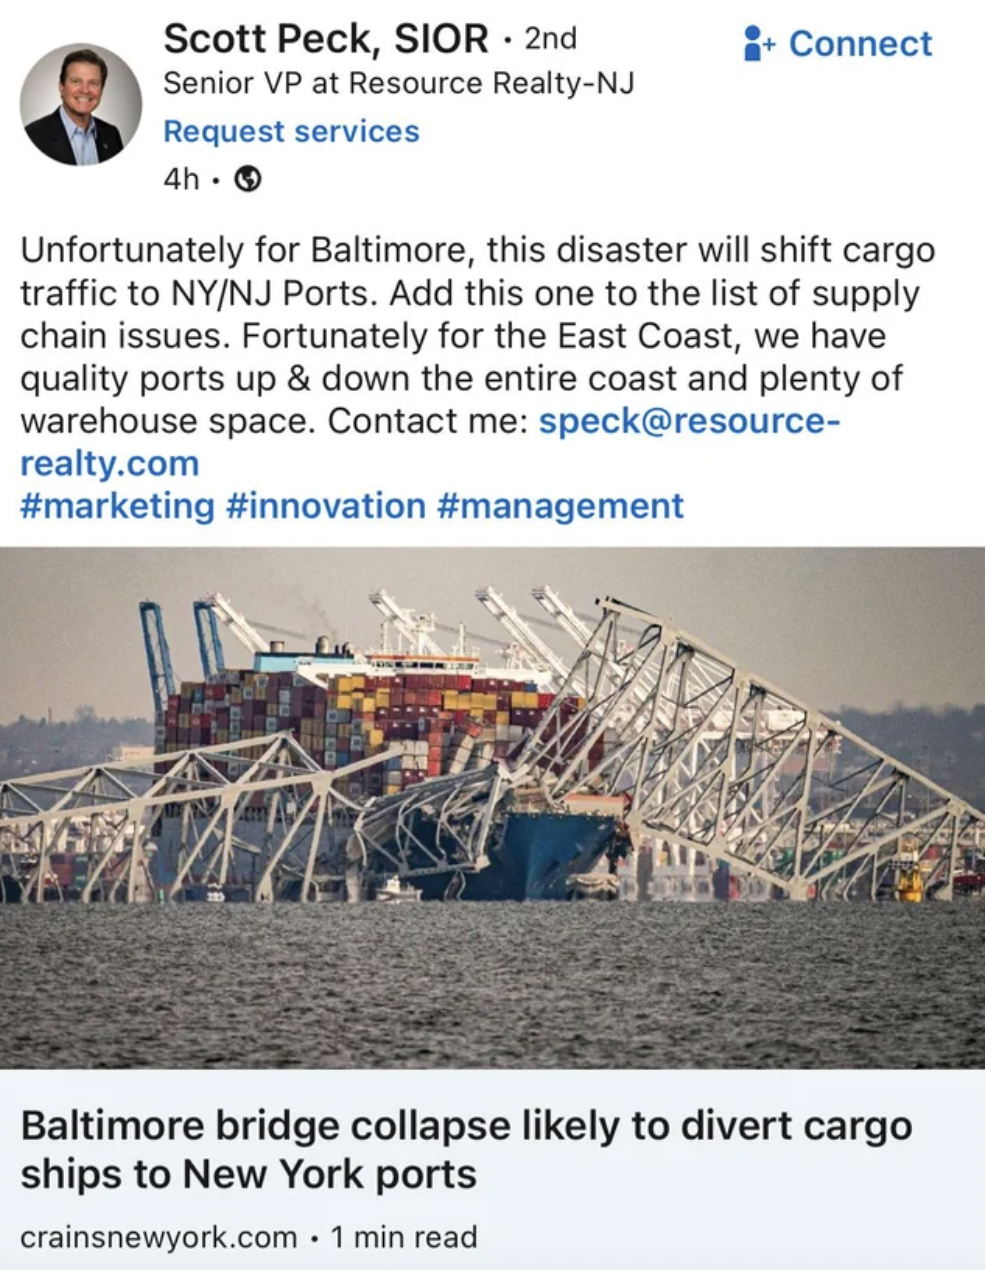 water resources - Scott Peck, Sior 2nd Senior Vp at Resource RealtyNj Request services 4h Connect Unfortunately for Baltimore, this disaster will shift cargo traffic to NyNj Ports. Add this one to the list of supply chain issues. Fortunately for the East 